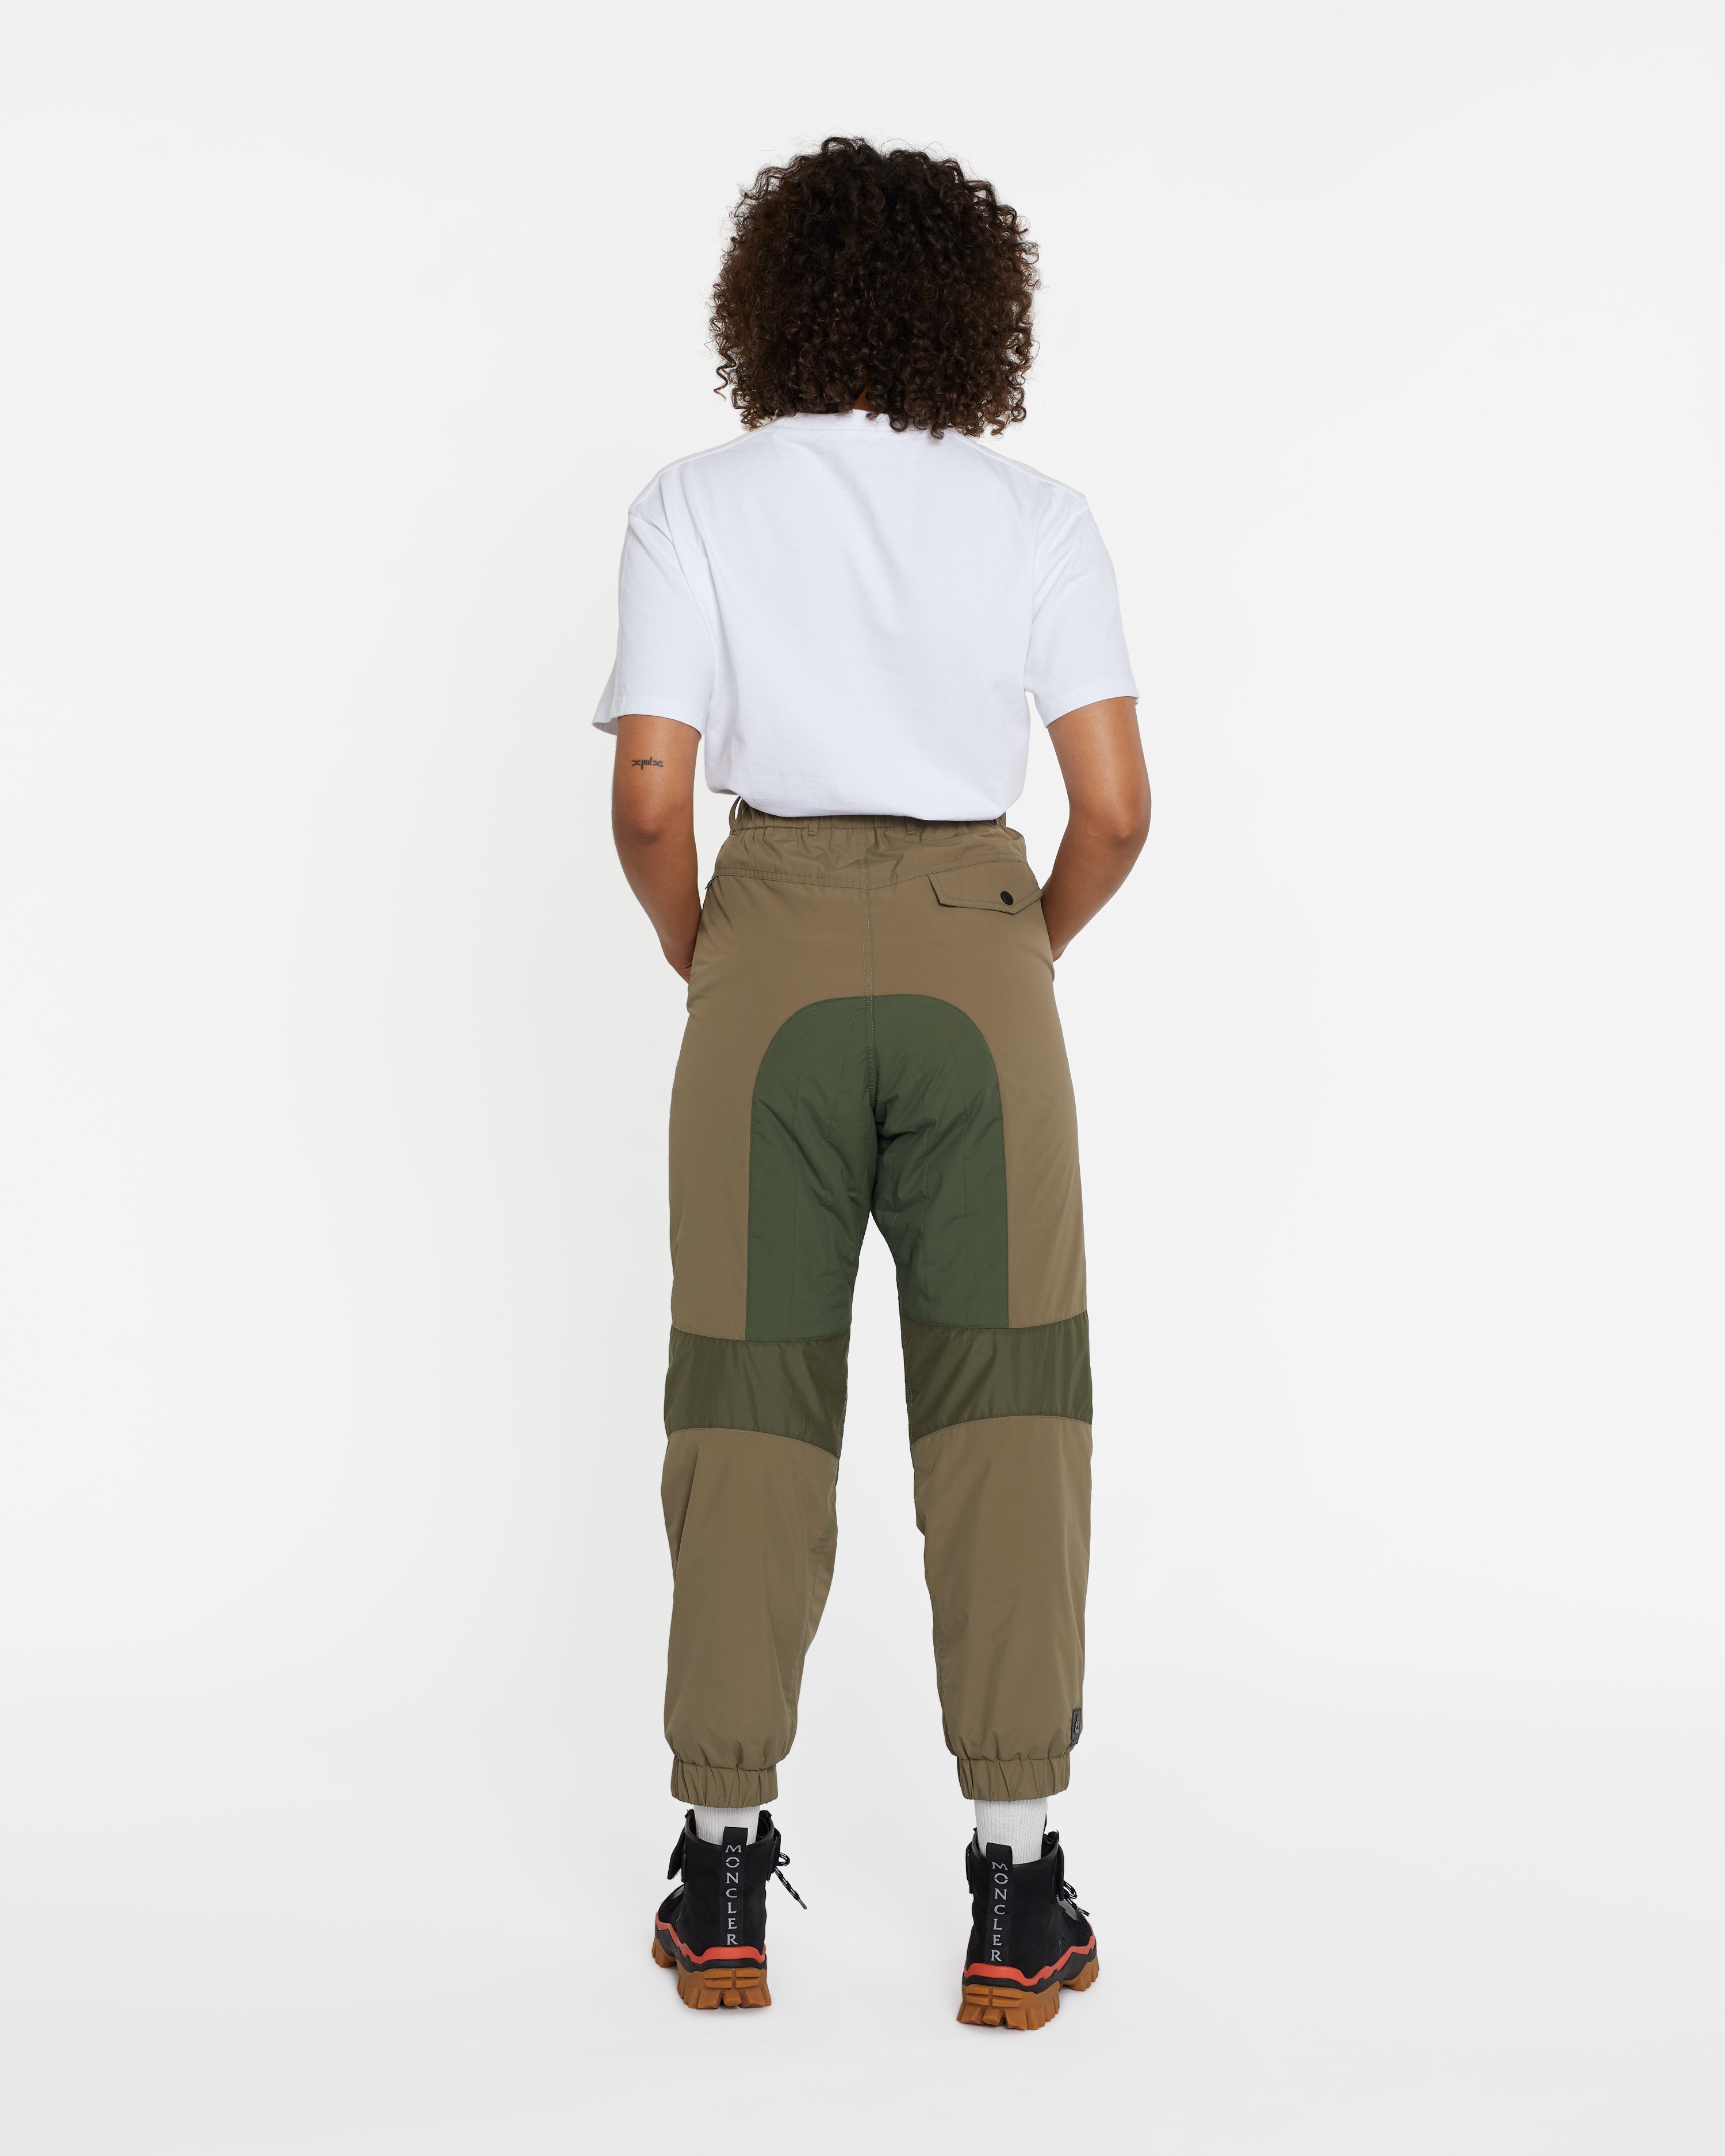 Moncler Genius - Recycled Sports Trousers - Clothing - Green - Image 3